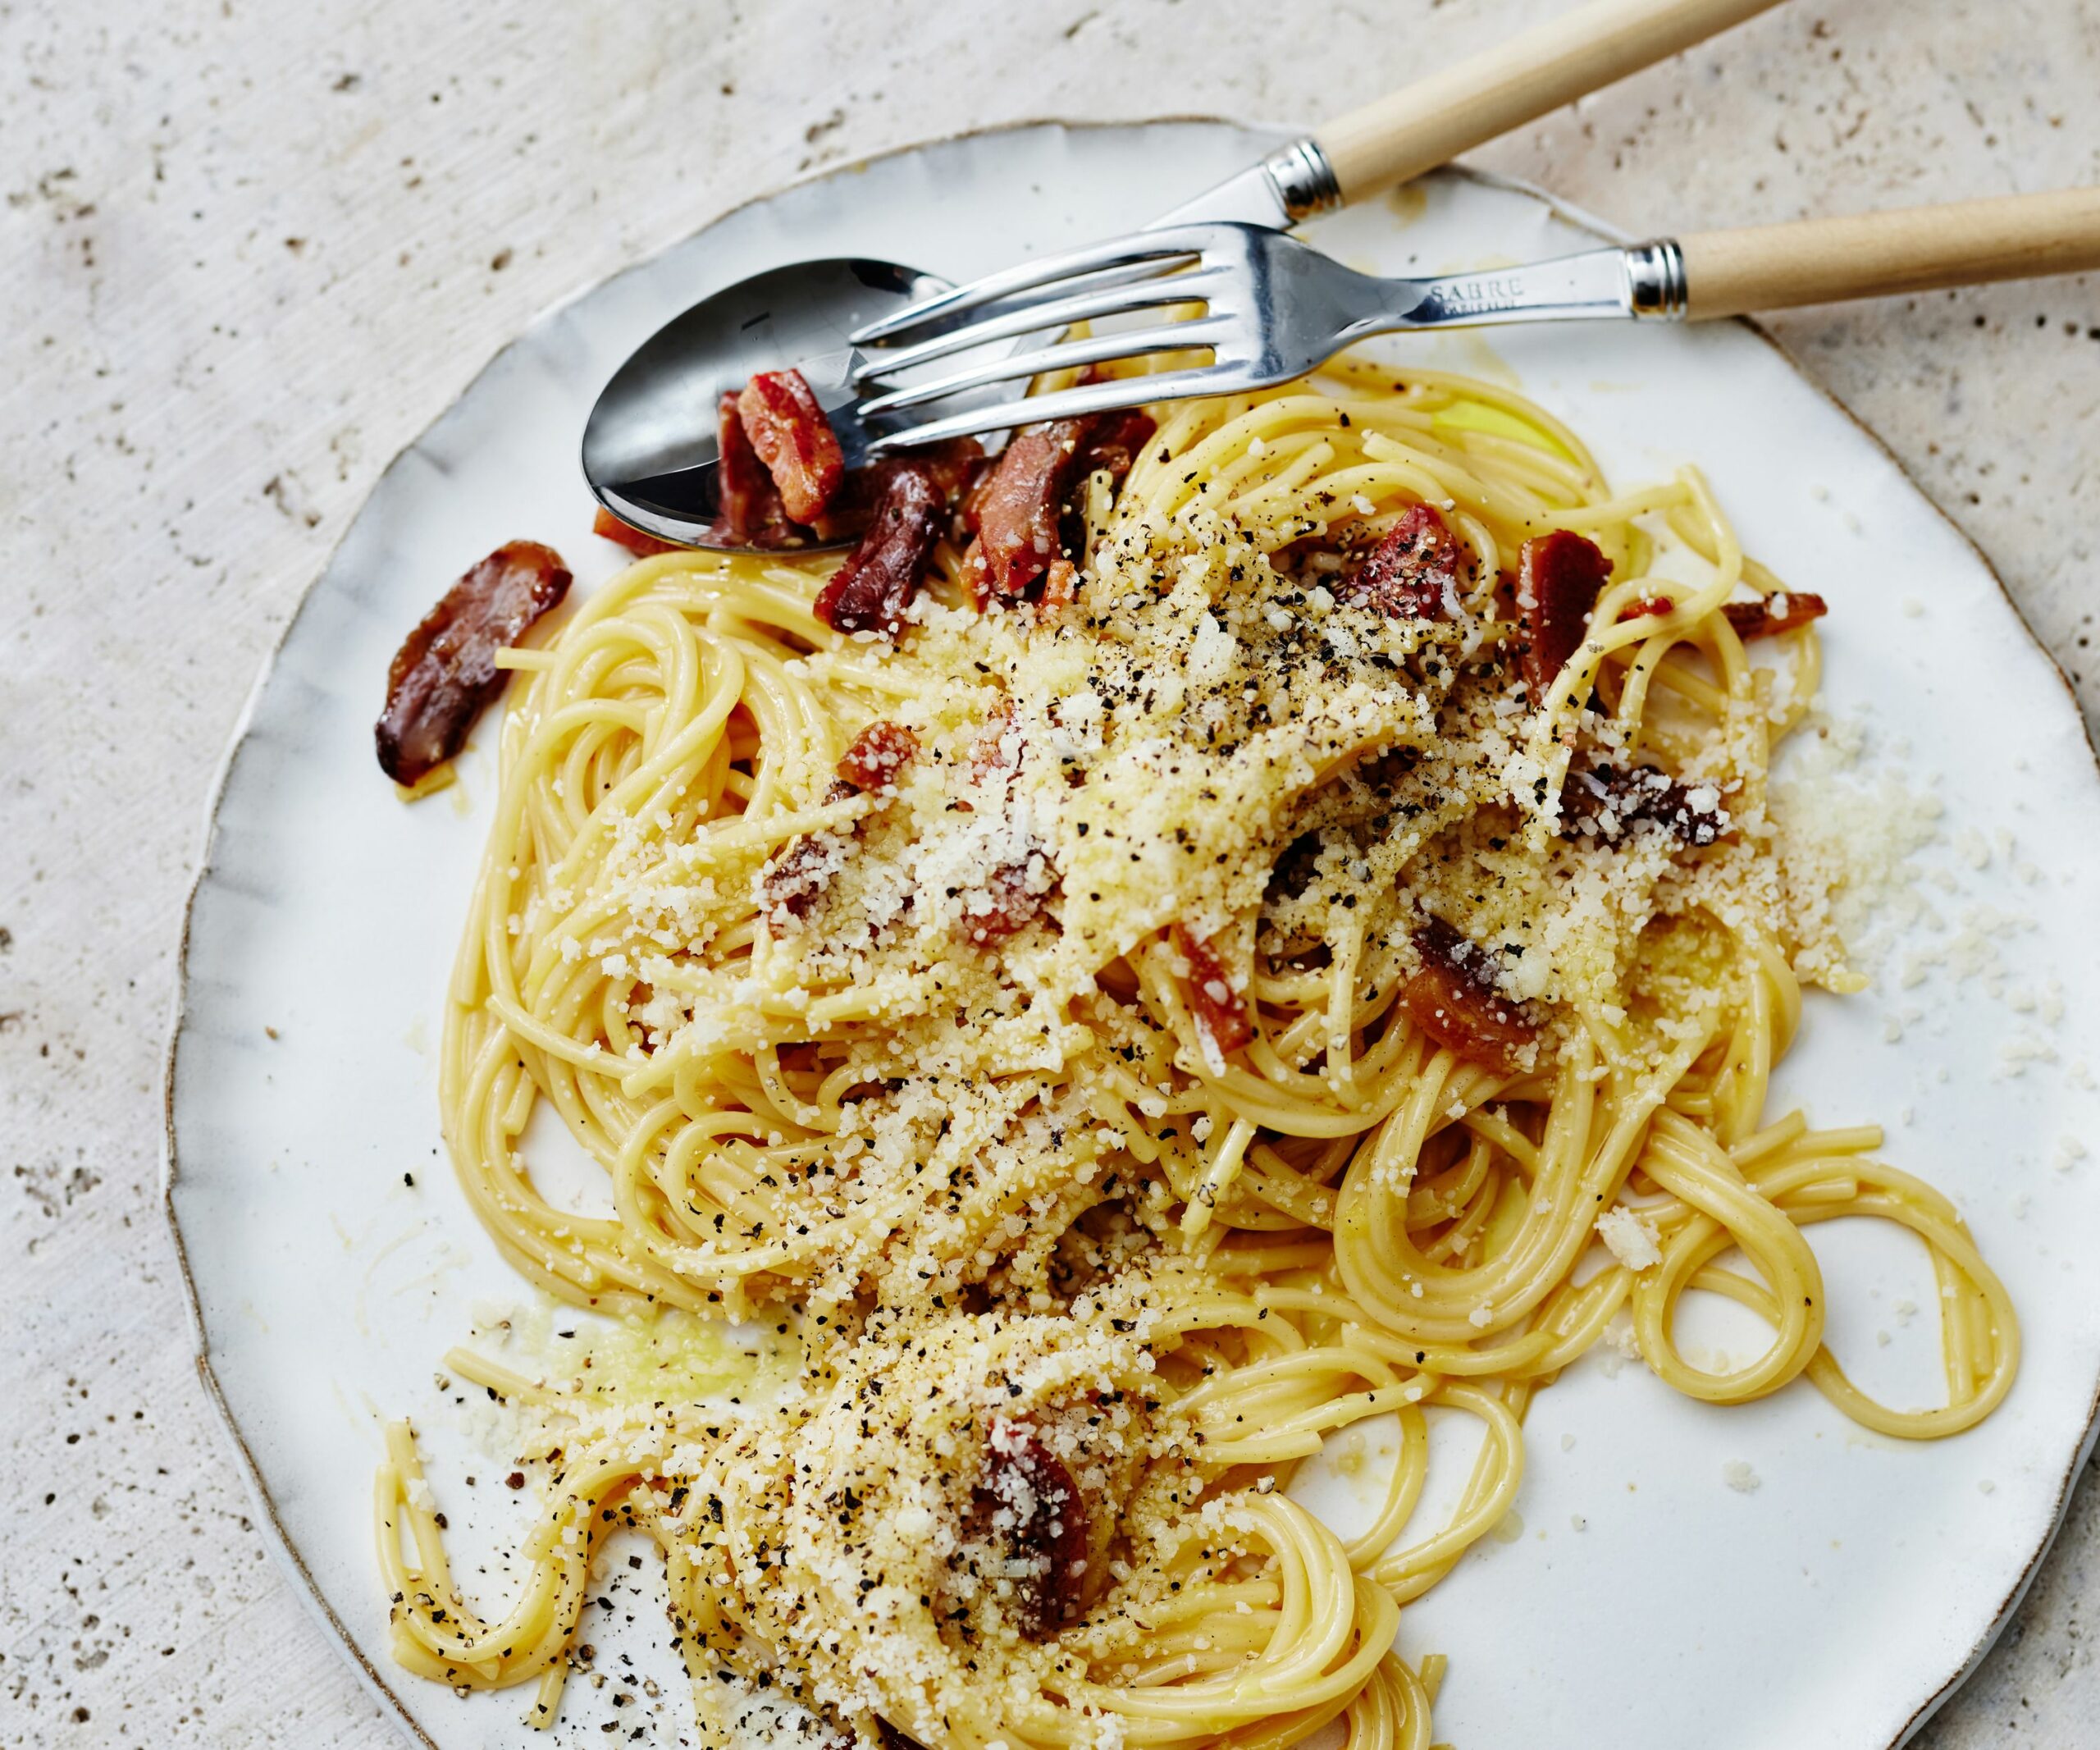 spaghetti carbonara on a plate with cutlery